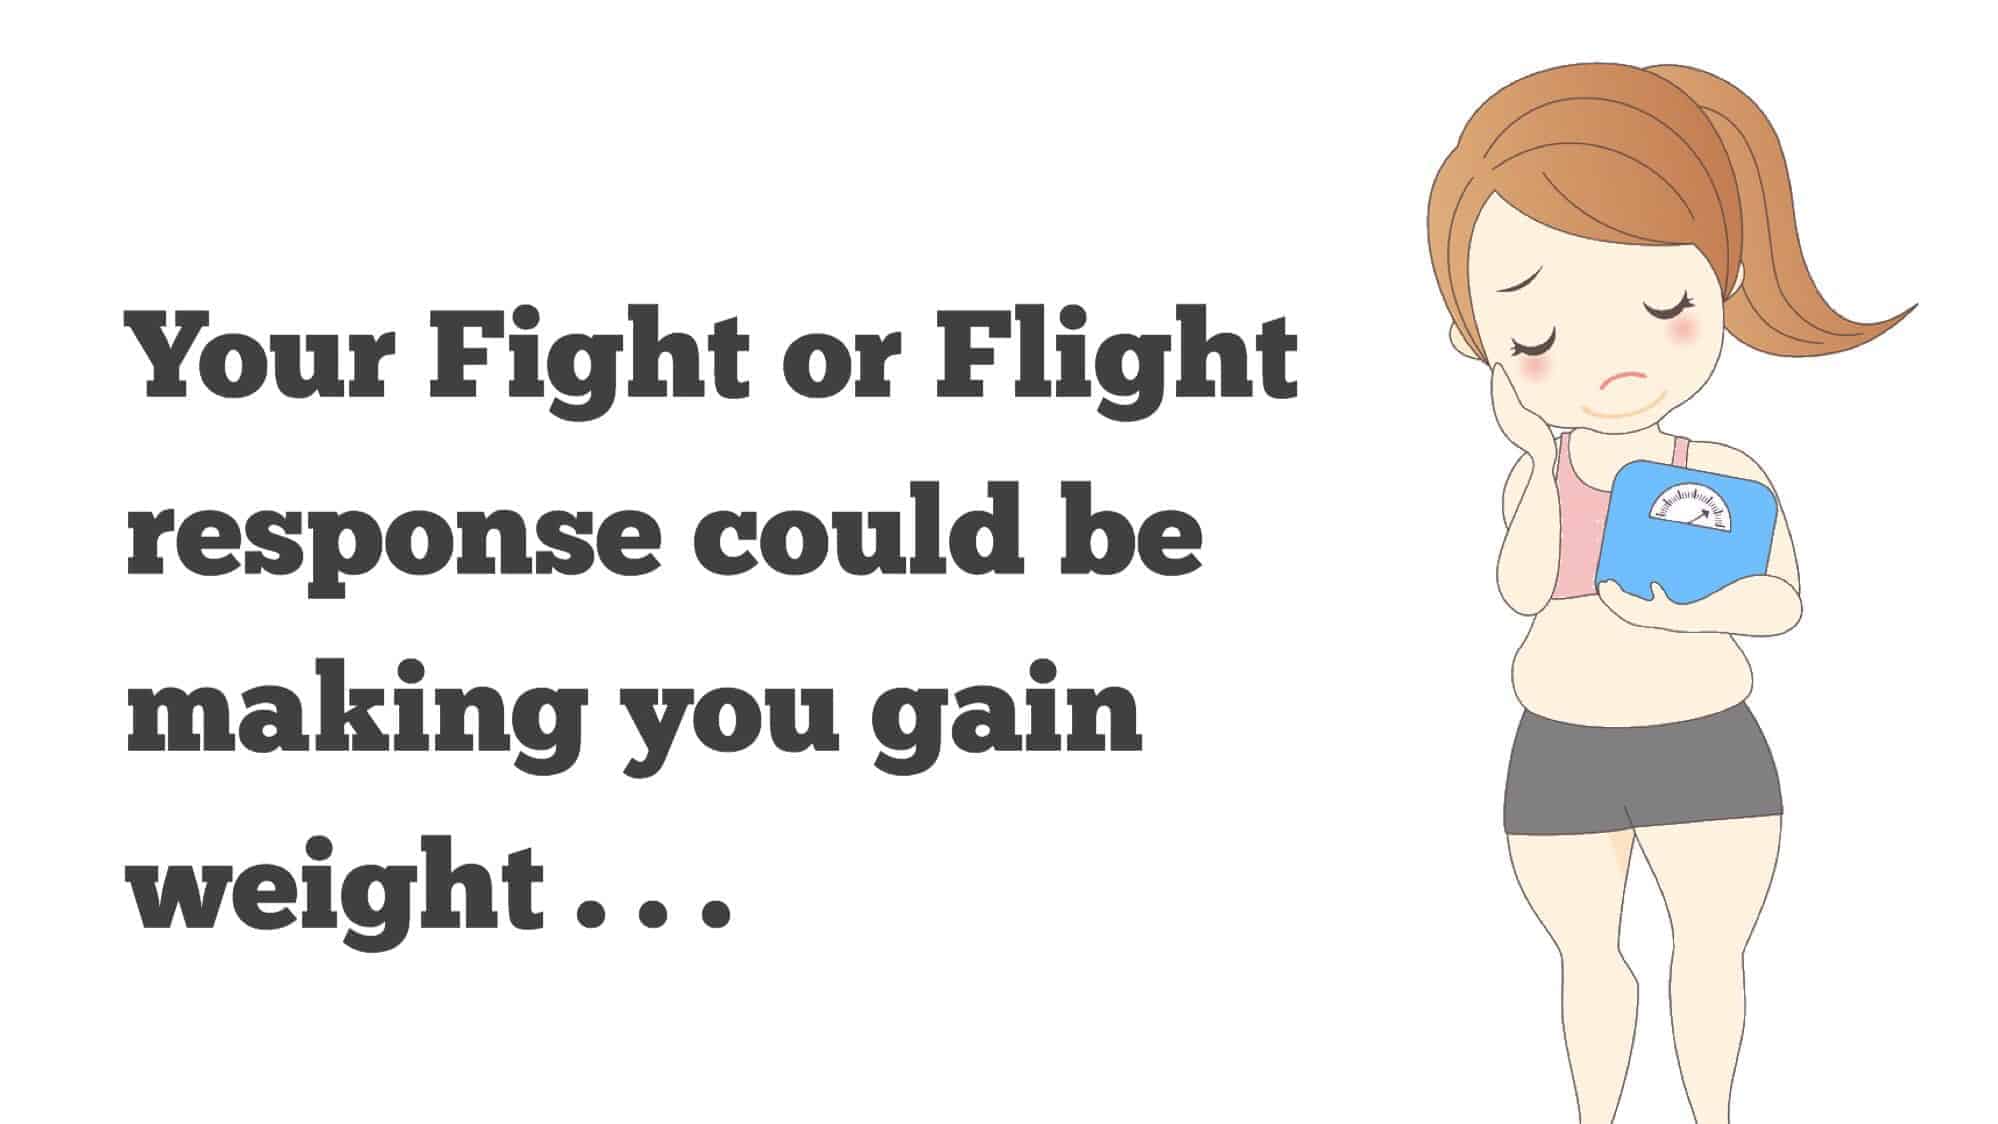 5 Signs Your “Fight or Flight” Response Is Making You Gain Weight